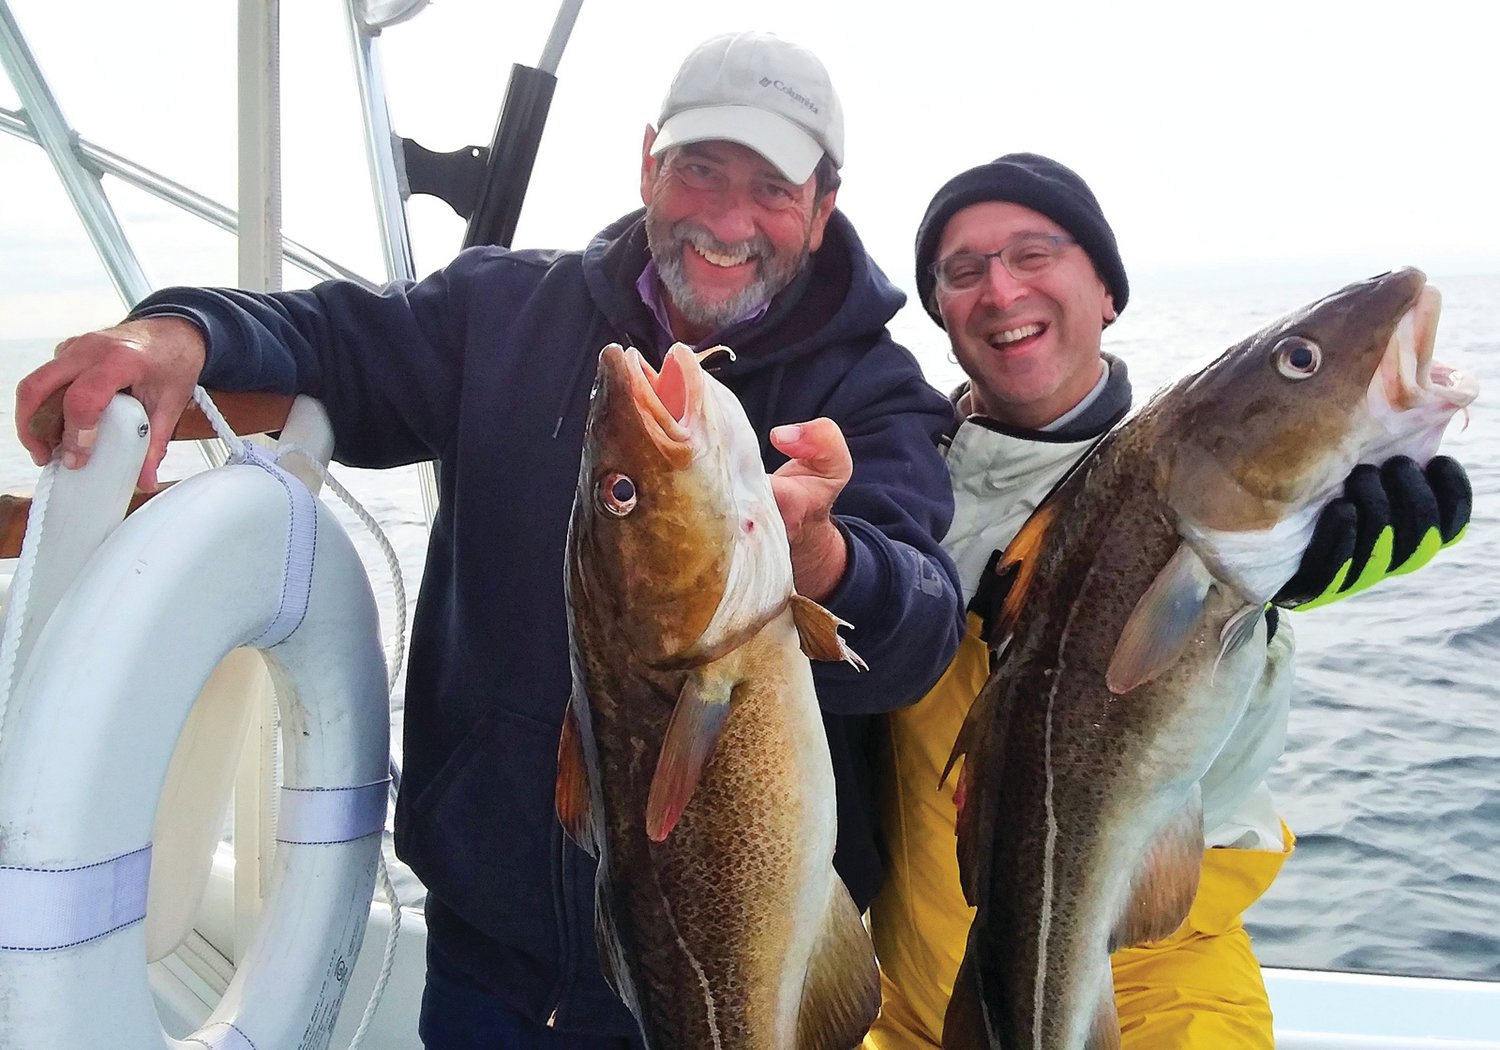 BIG COD: Capt. Peter Bacon of Big Game Charters with a January cod caught off Rhode Island.